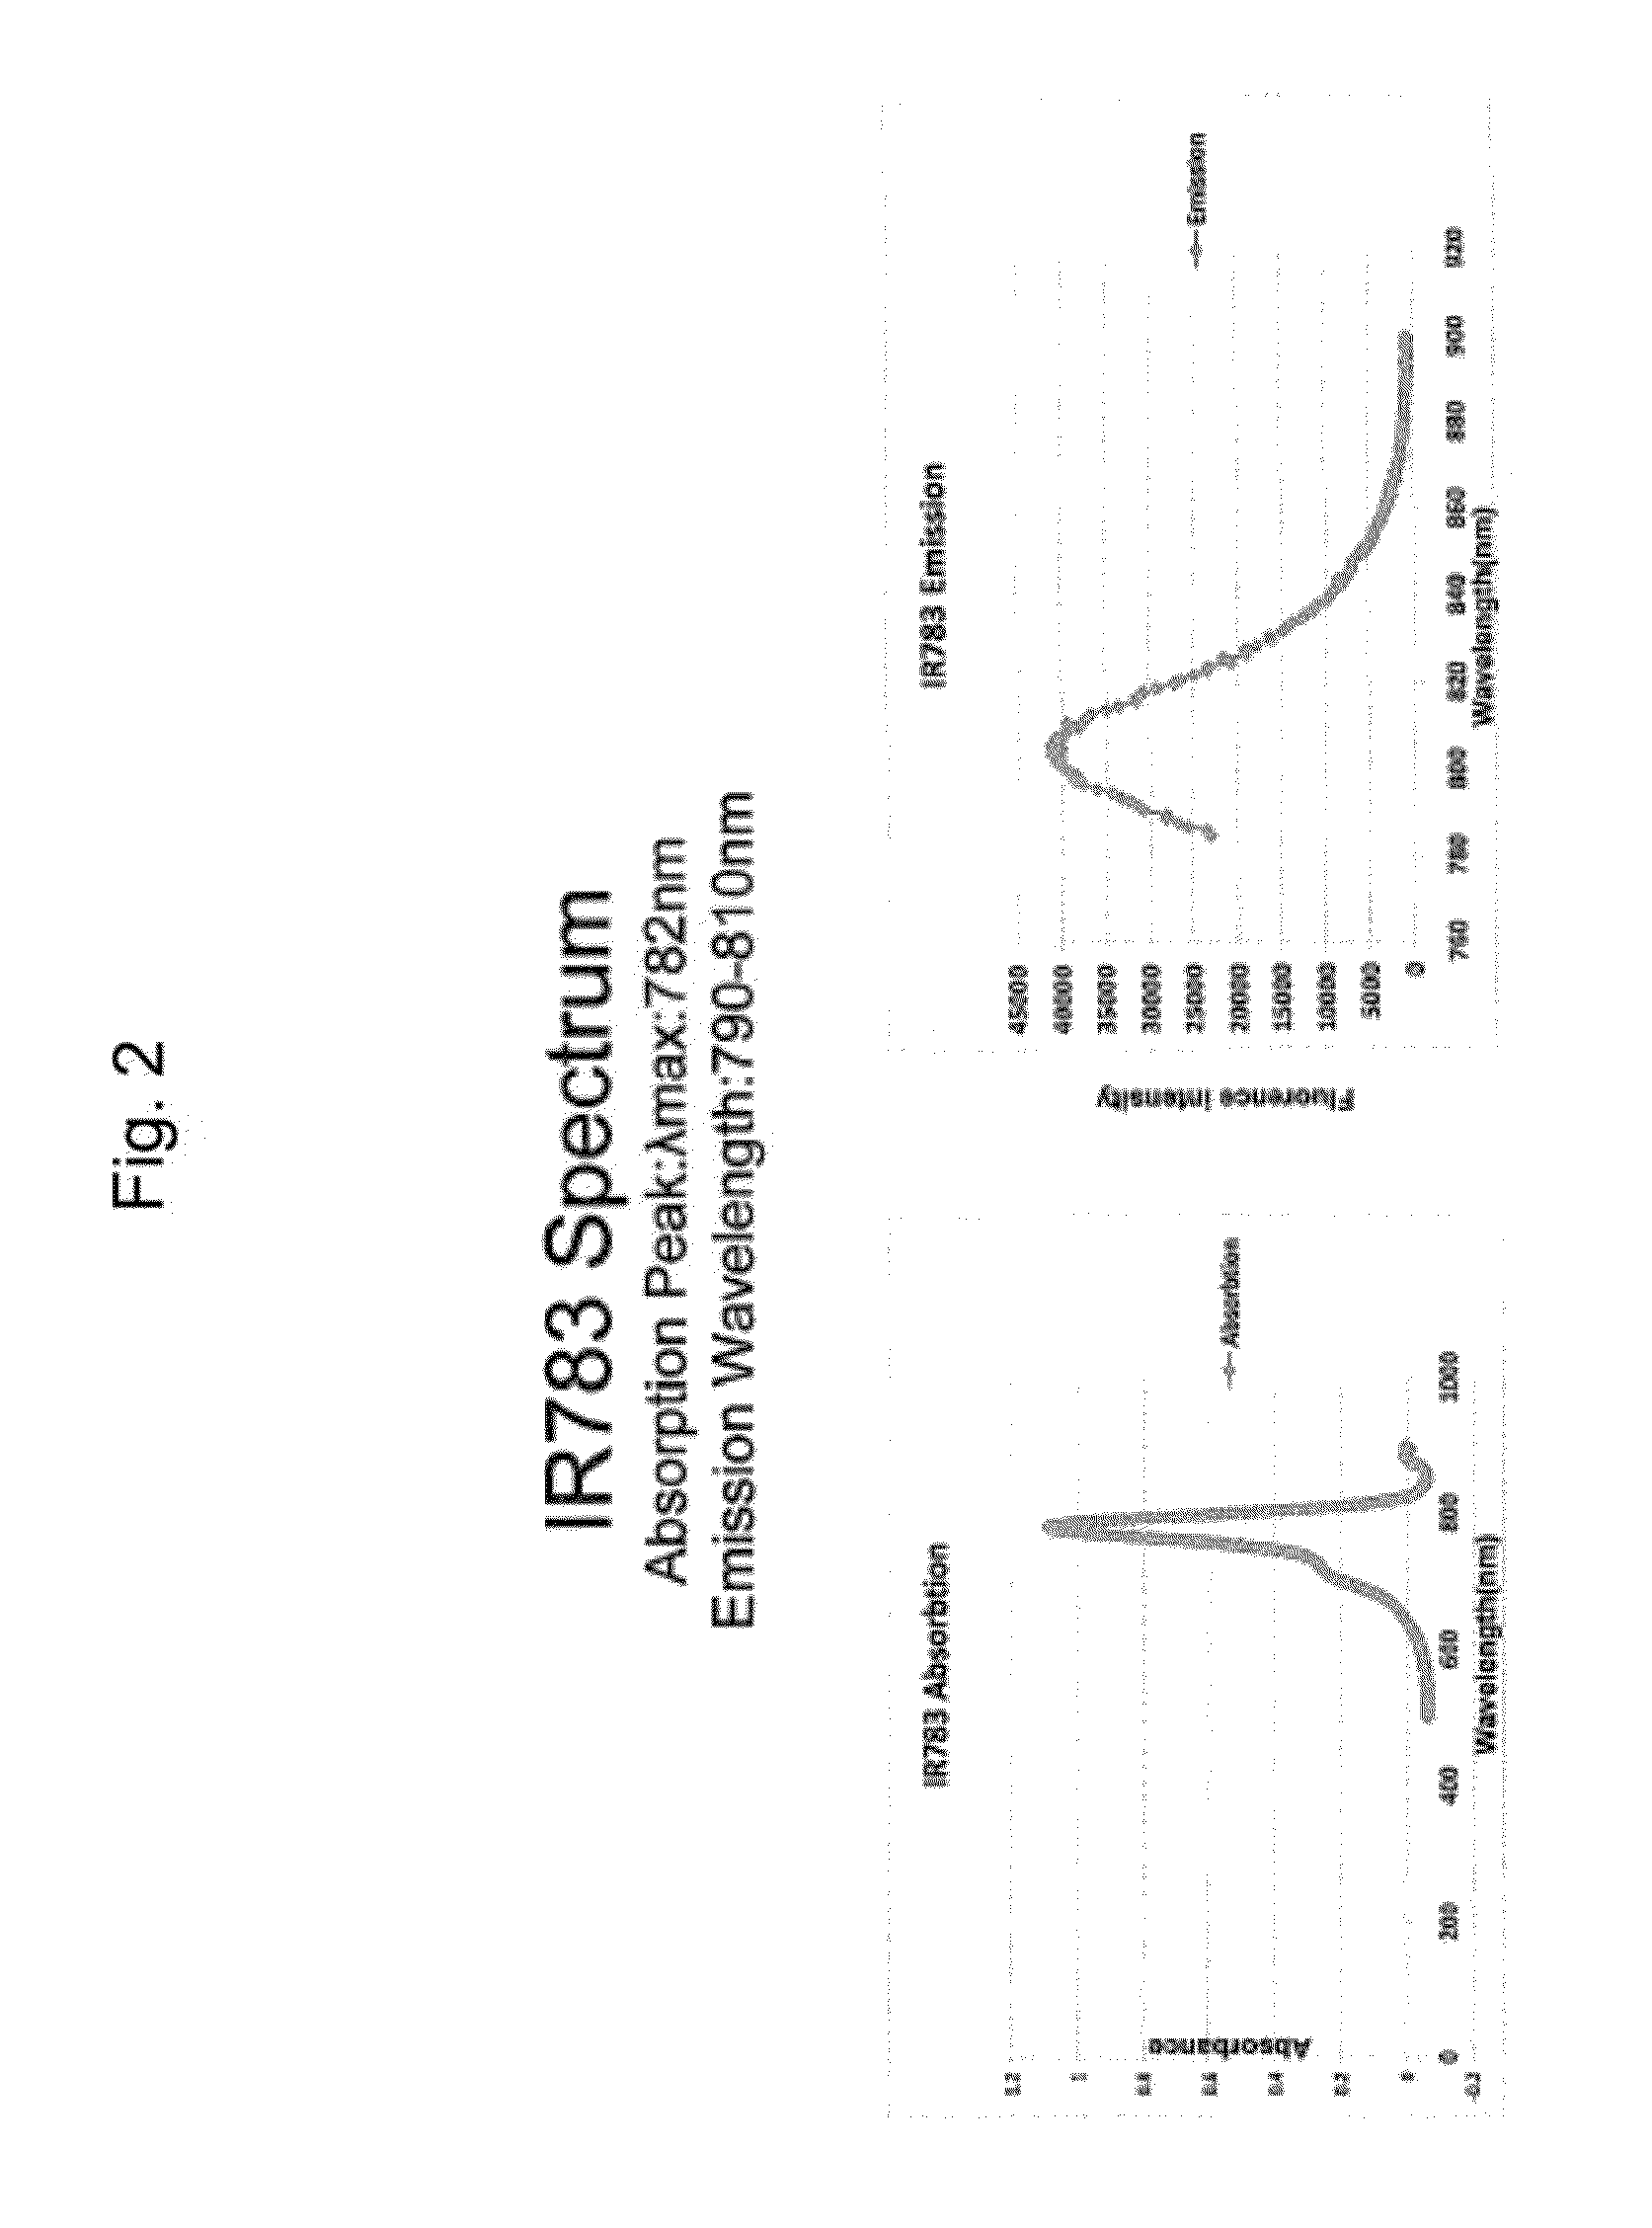 Method of using near infrared fluorescent dyes for imaging and targeting cancers